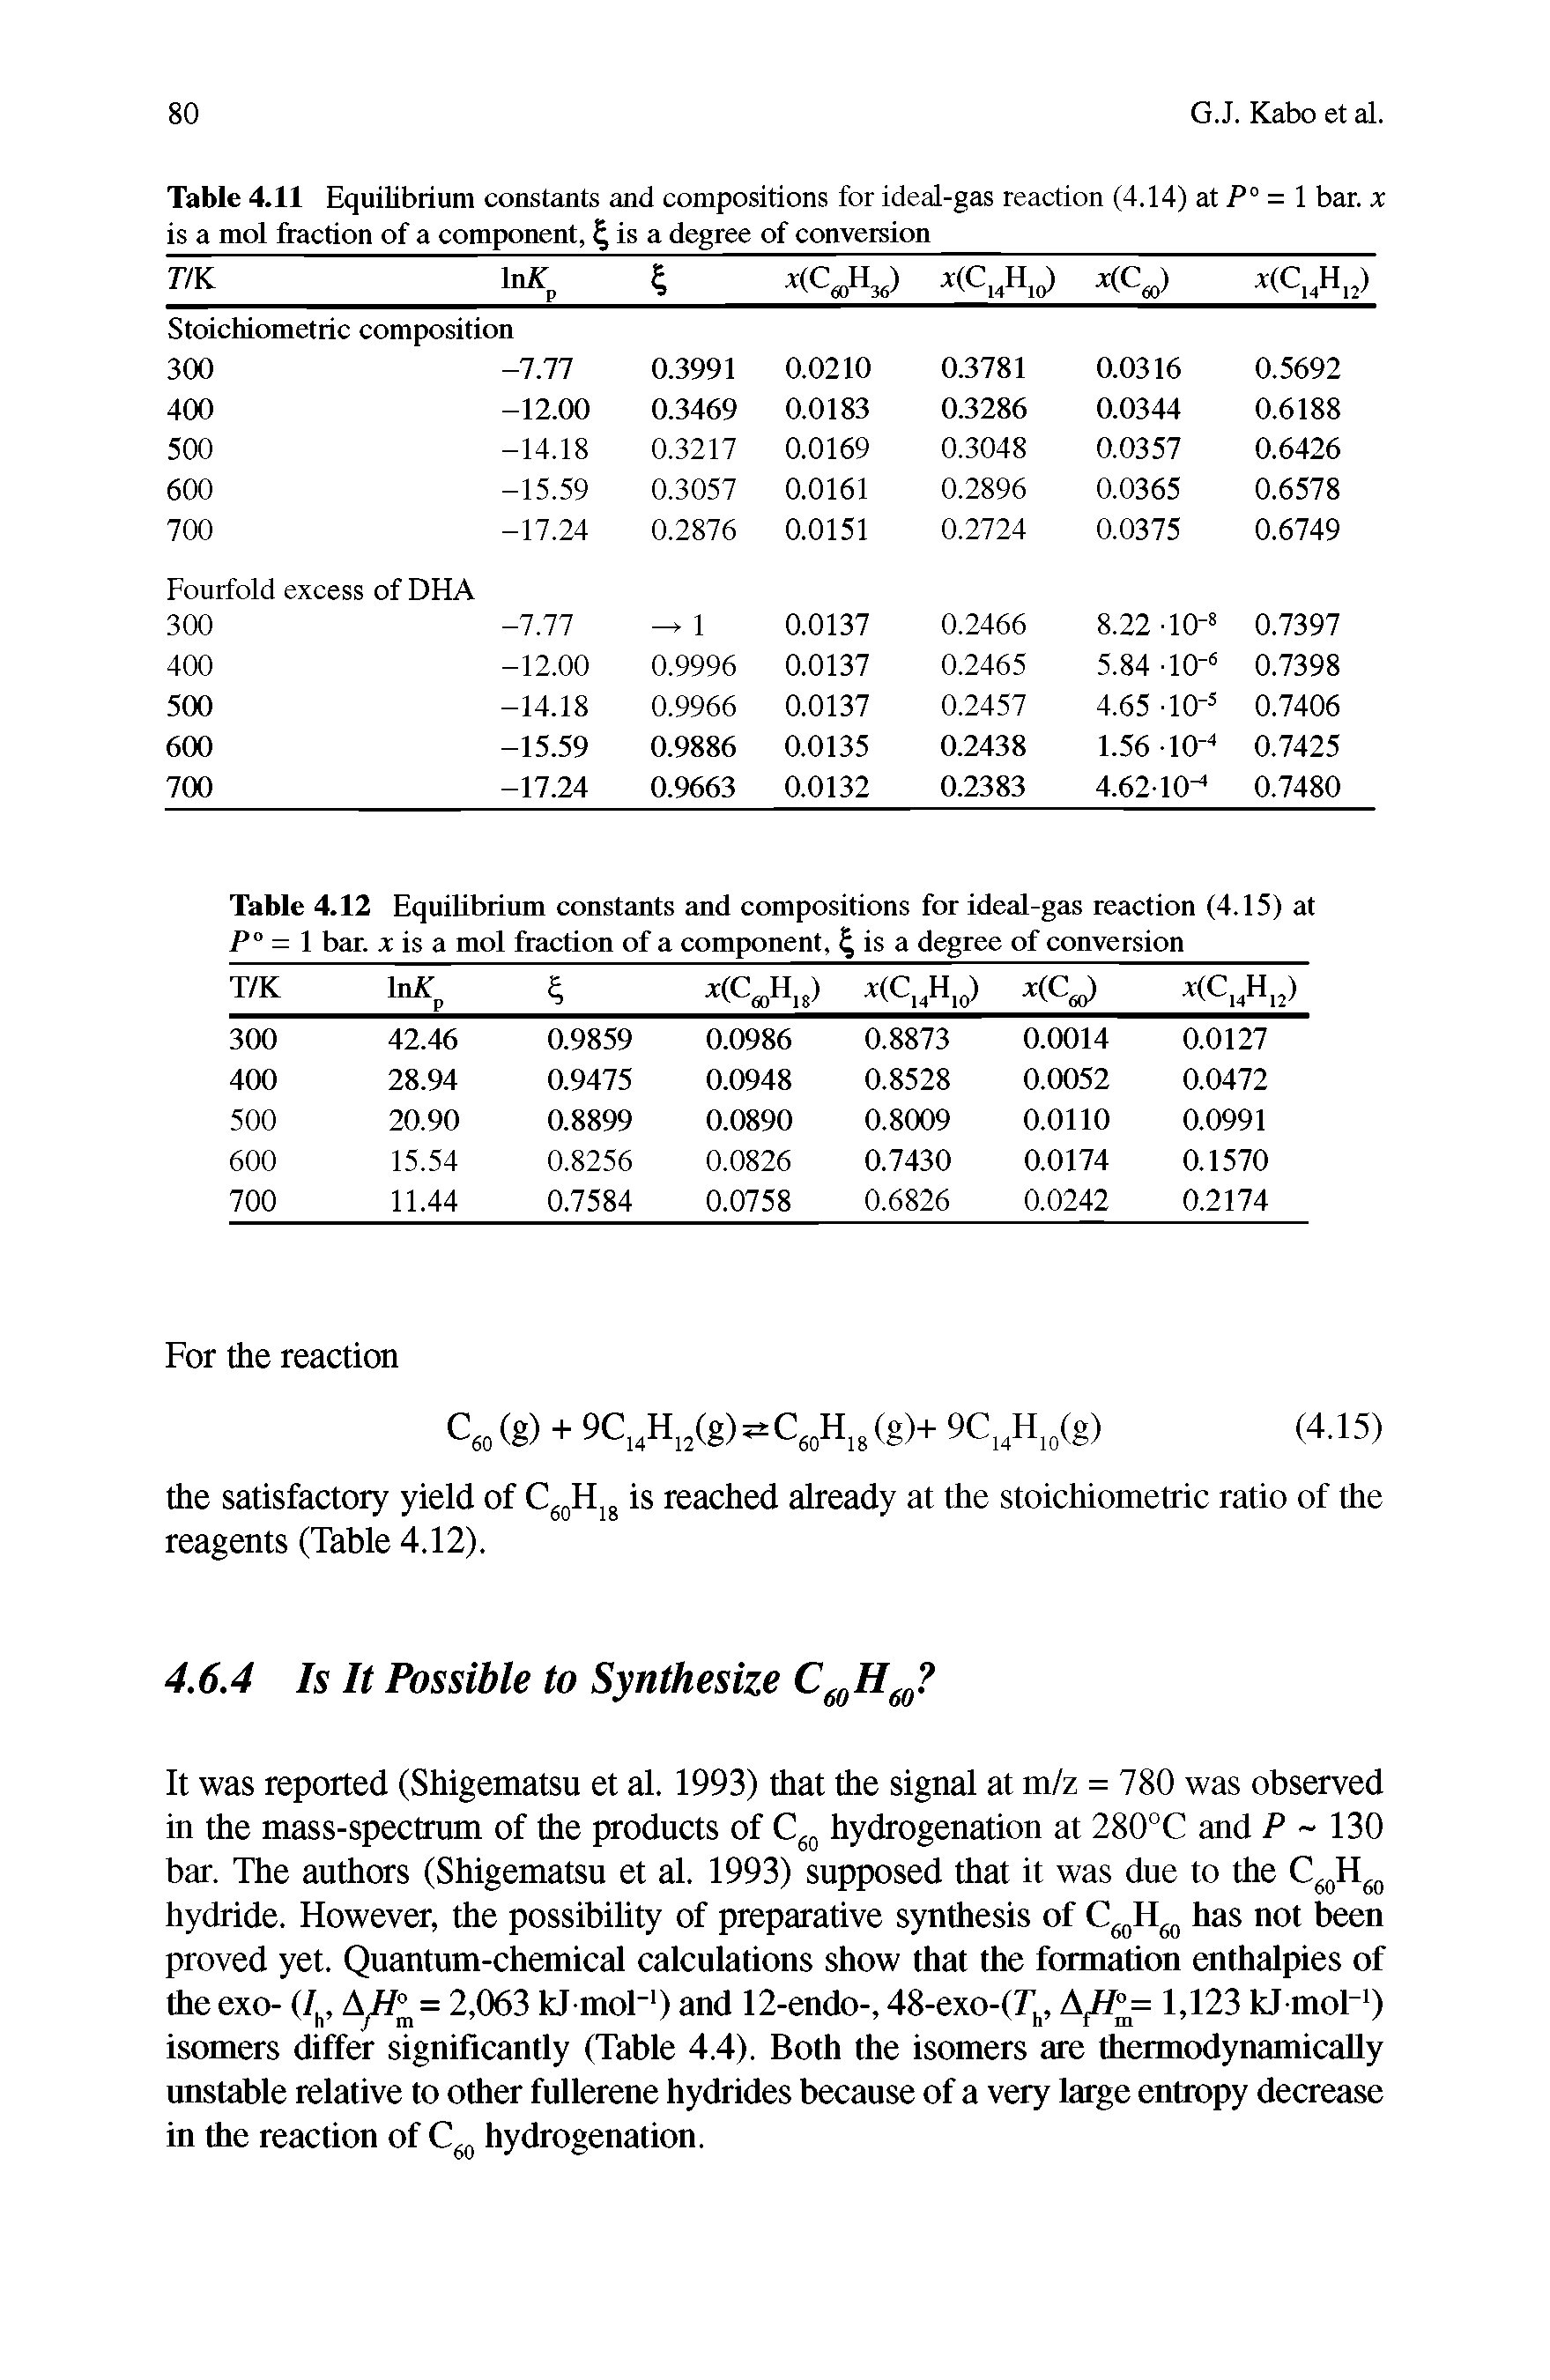 Table 4.11 Equilibrium constants and compositions for ideal-gas reaction (4.14) at P° = 1 bar. x is a mol fraction of a component, is a degree of conversion...